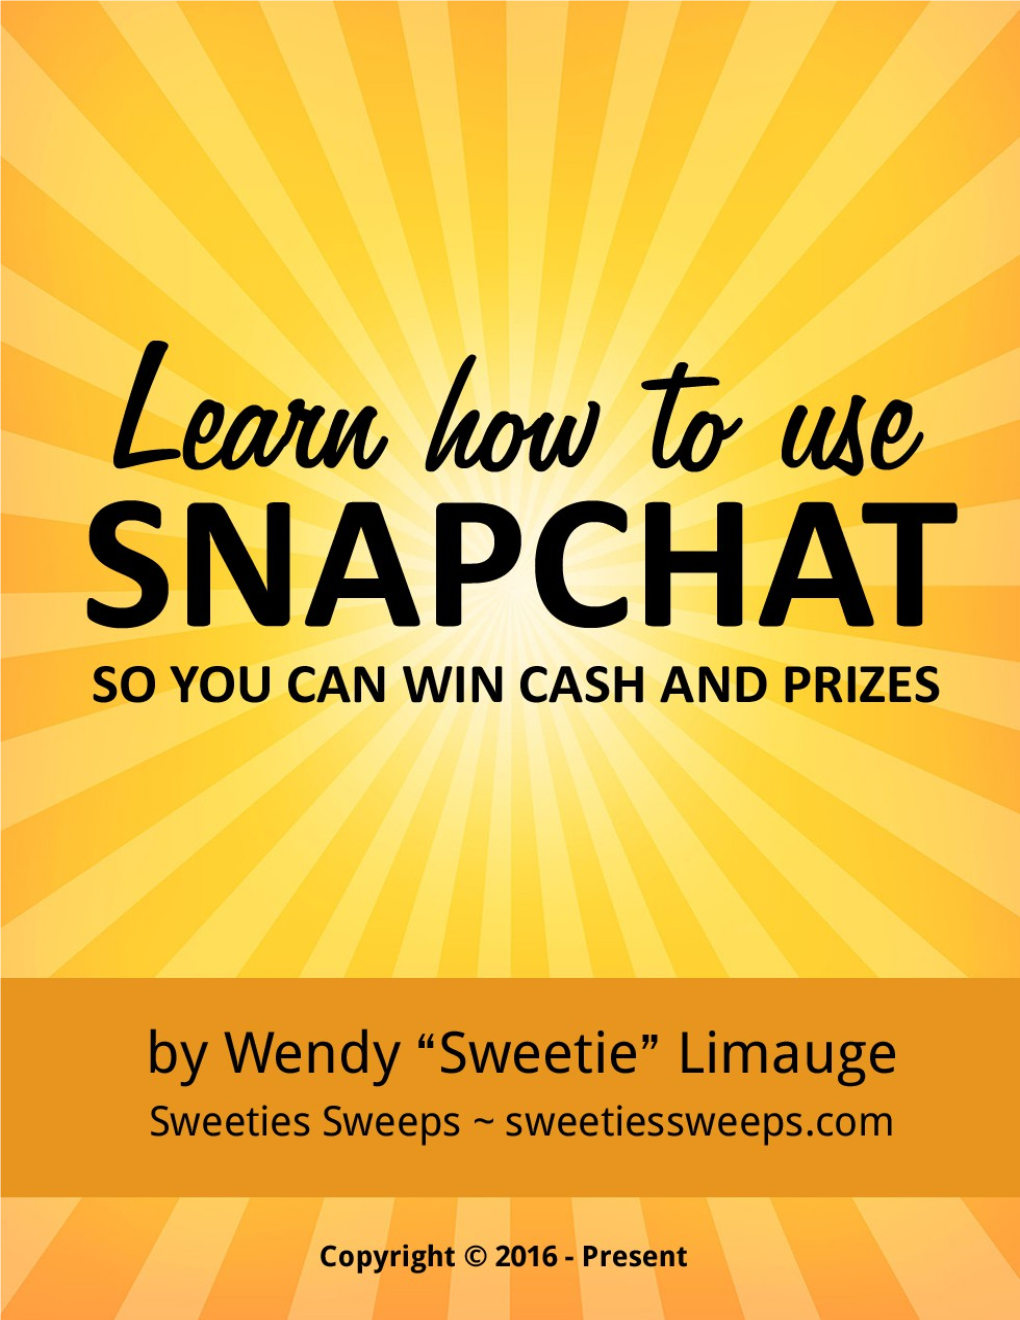 How to Win Cash and Prize on Snapchat